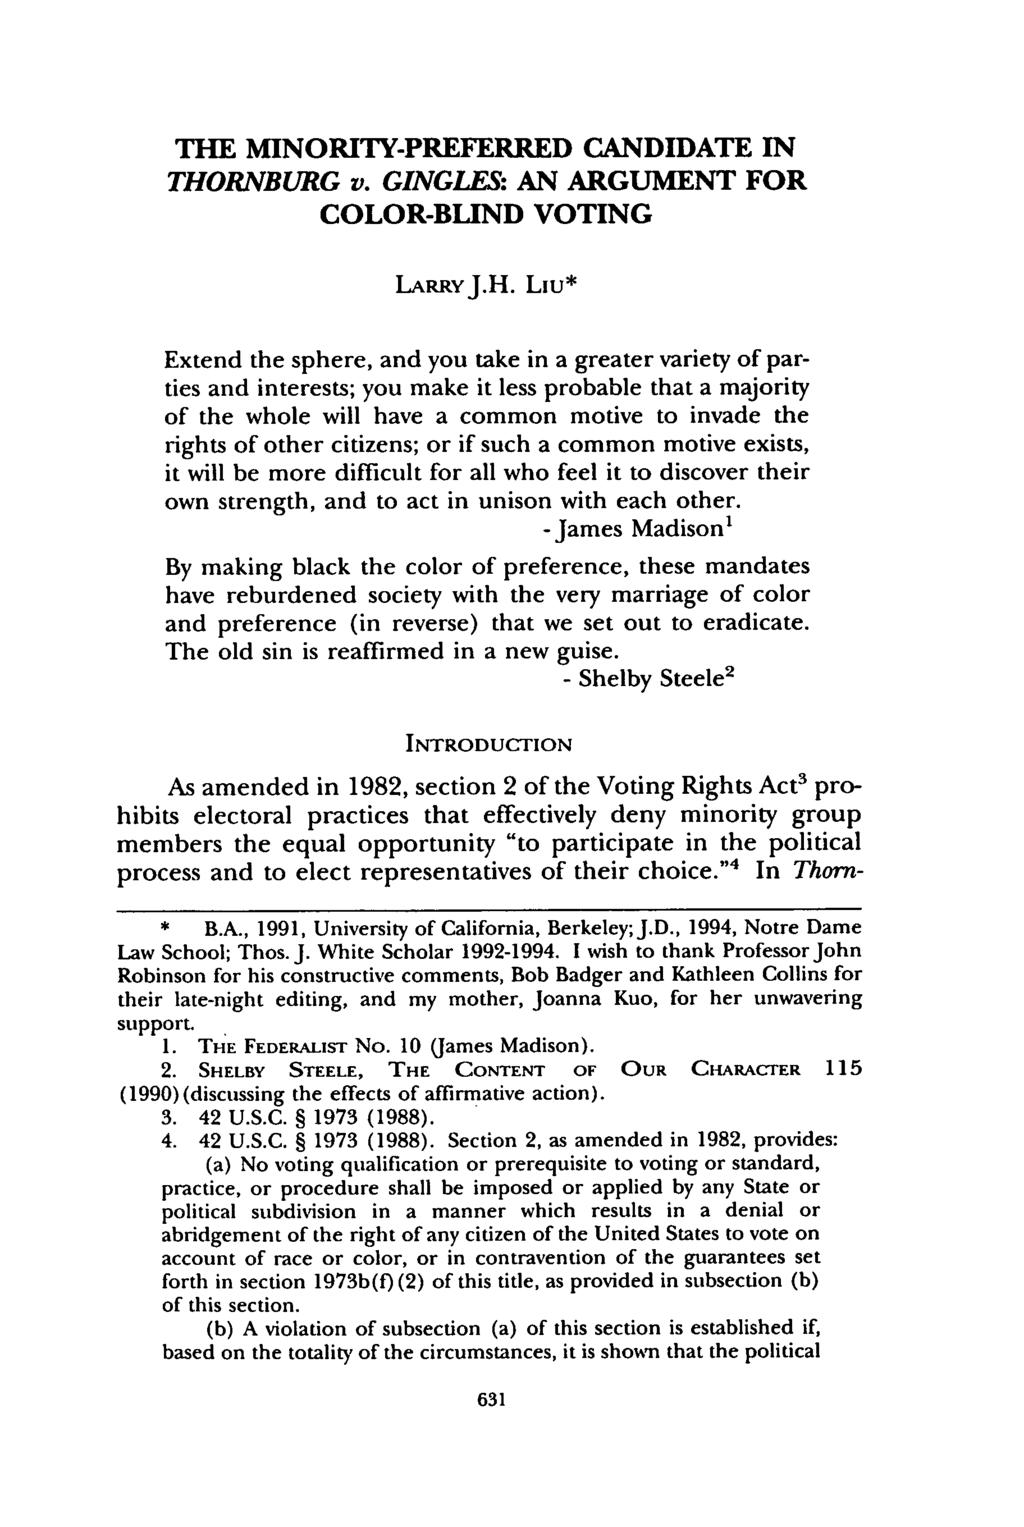 THE MINORITY-PREFERRED CANDIDATE IN THORNBURG v. GINGLES: AN ARGUMENT FOR COLOR-BLIND VOTING LARRYJ.H. Liu* Extend the sphere, and you take in a greater variety of parties and interests; you make it